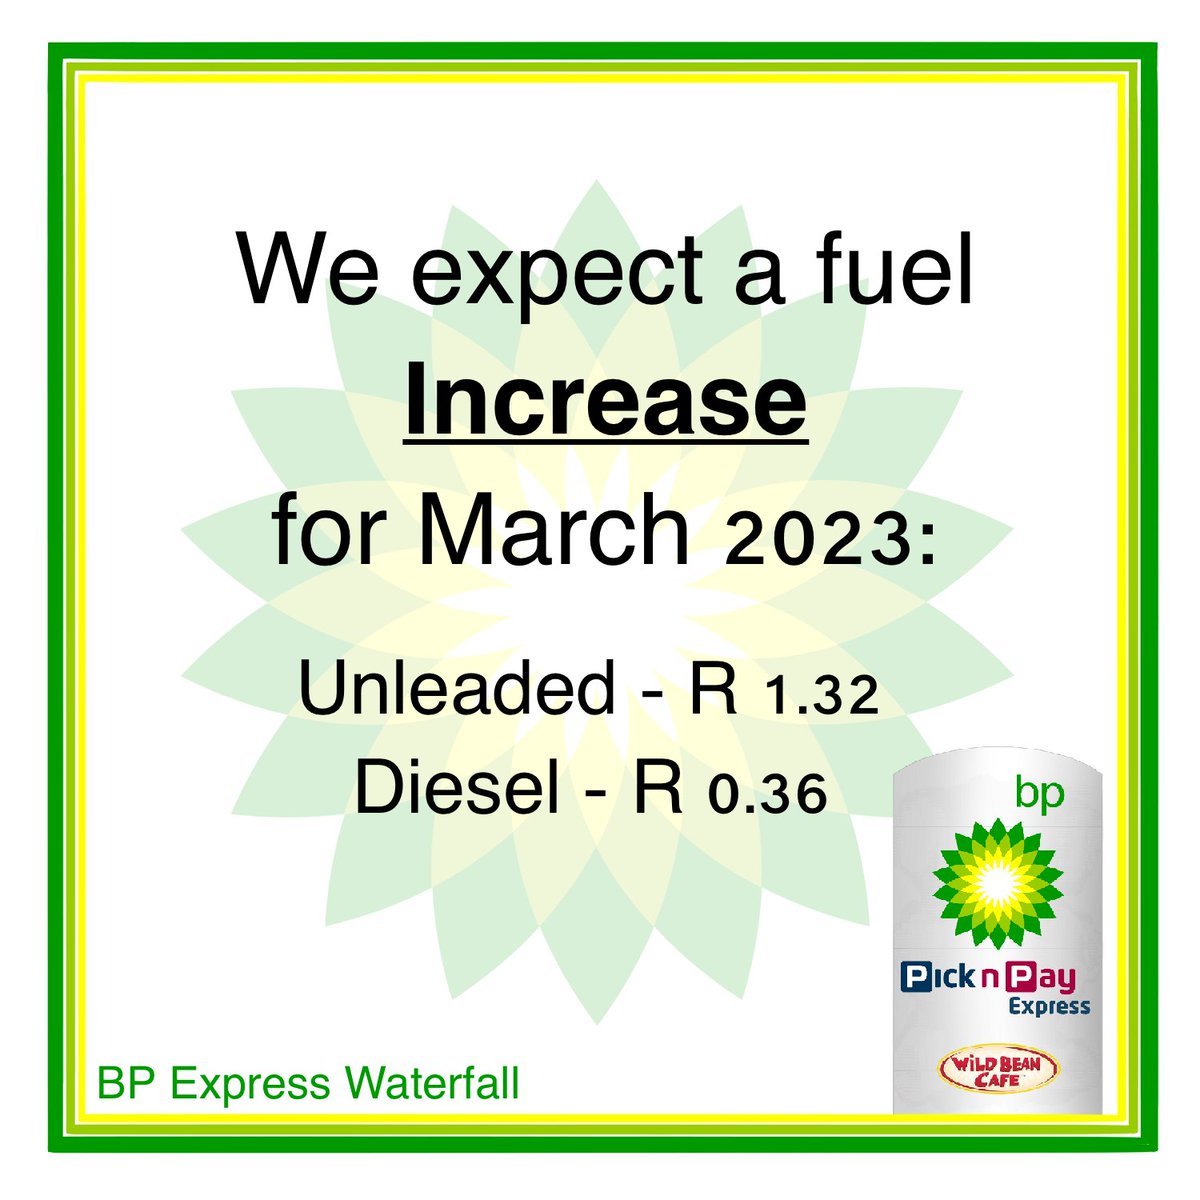 We are currently tracking an INCREASE in fuel for March 2023. 

#fuelpriceincrease #fuelpriceupdate #fuelupdate #FuelPriceHike #DieselPrice #diesel #PetrolDieselPrice #petrol #PetrolPrice #petroleum